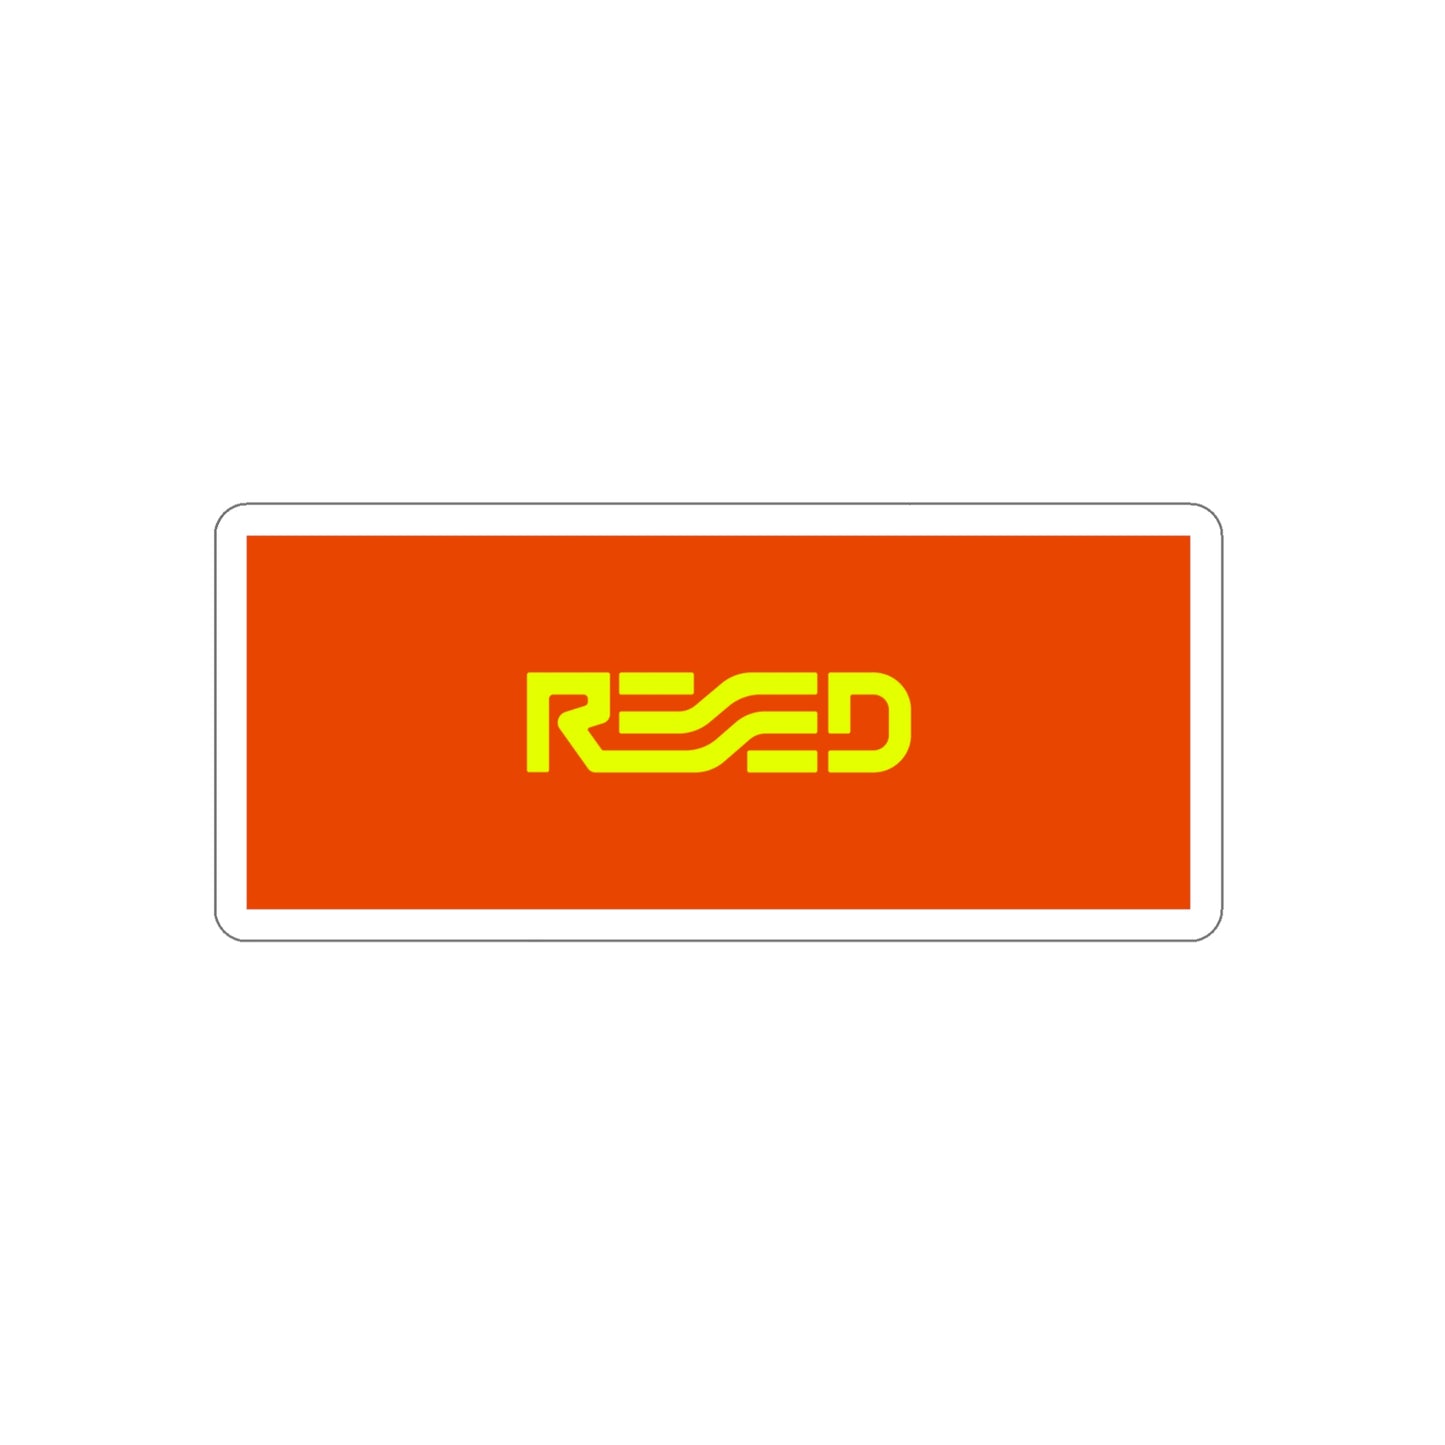 REED LOGO RED/YELLOW - Never Stop Chasing